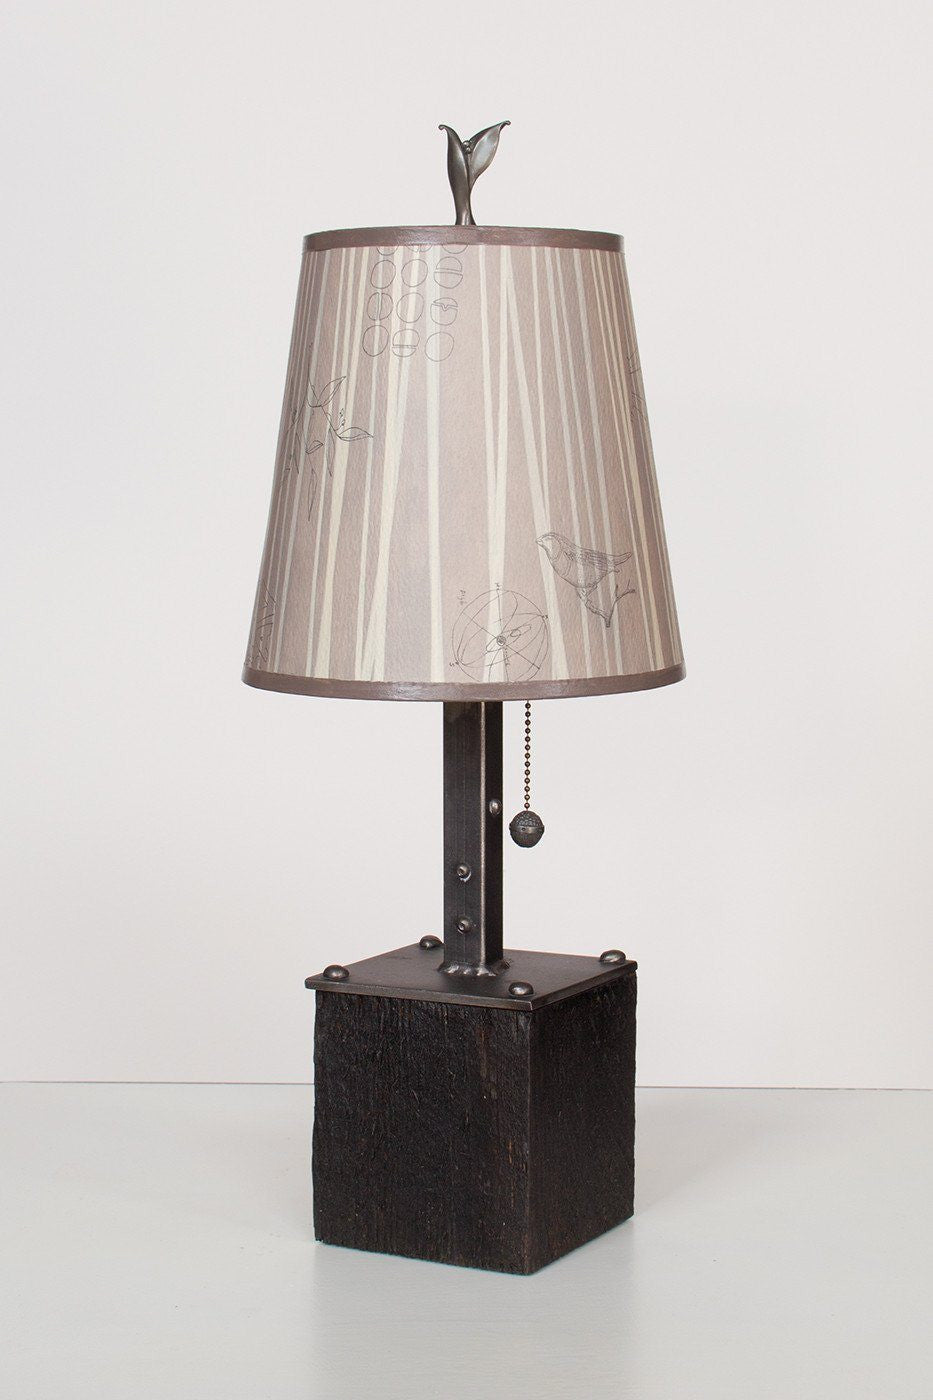 Janna Ugone &amp; Co Table Lamps Steel Table Lamp on Reclaimed Wood with Small Drum Shade in Birch Lines